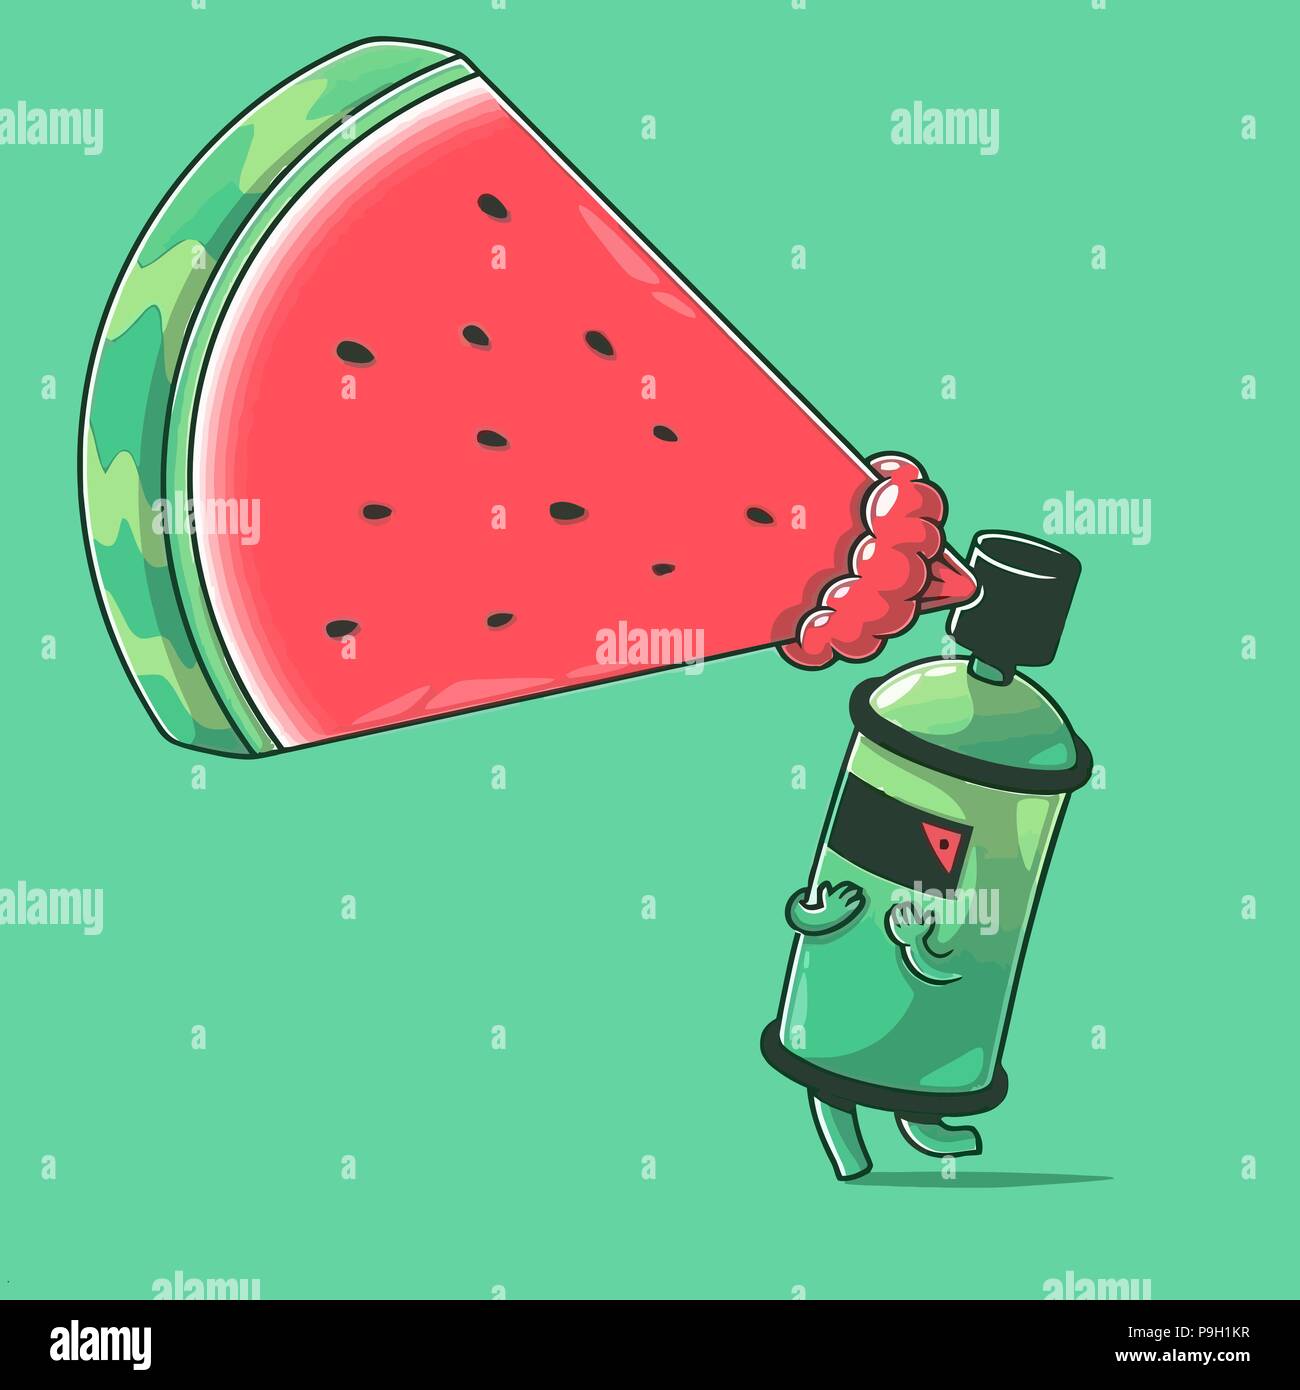 'SummerSpry' Digital art Illustration (Vector Based) Watermalon spryed with green background Stock Vector